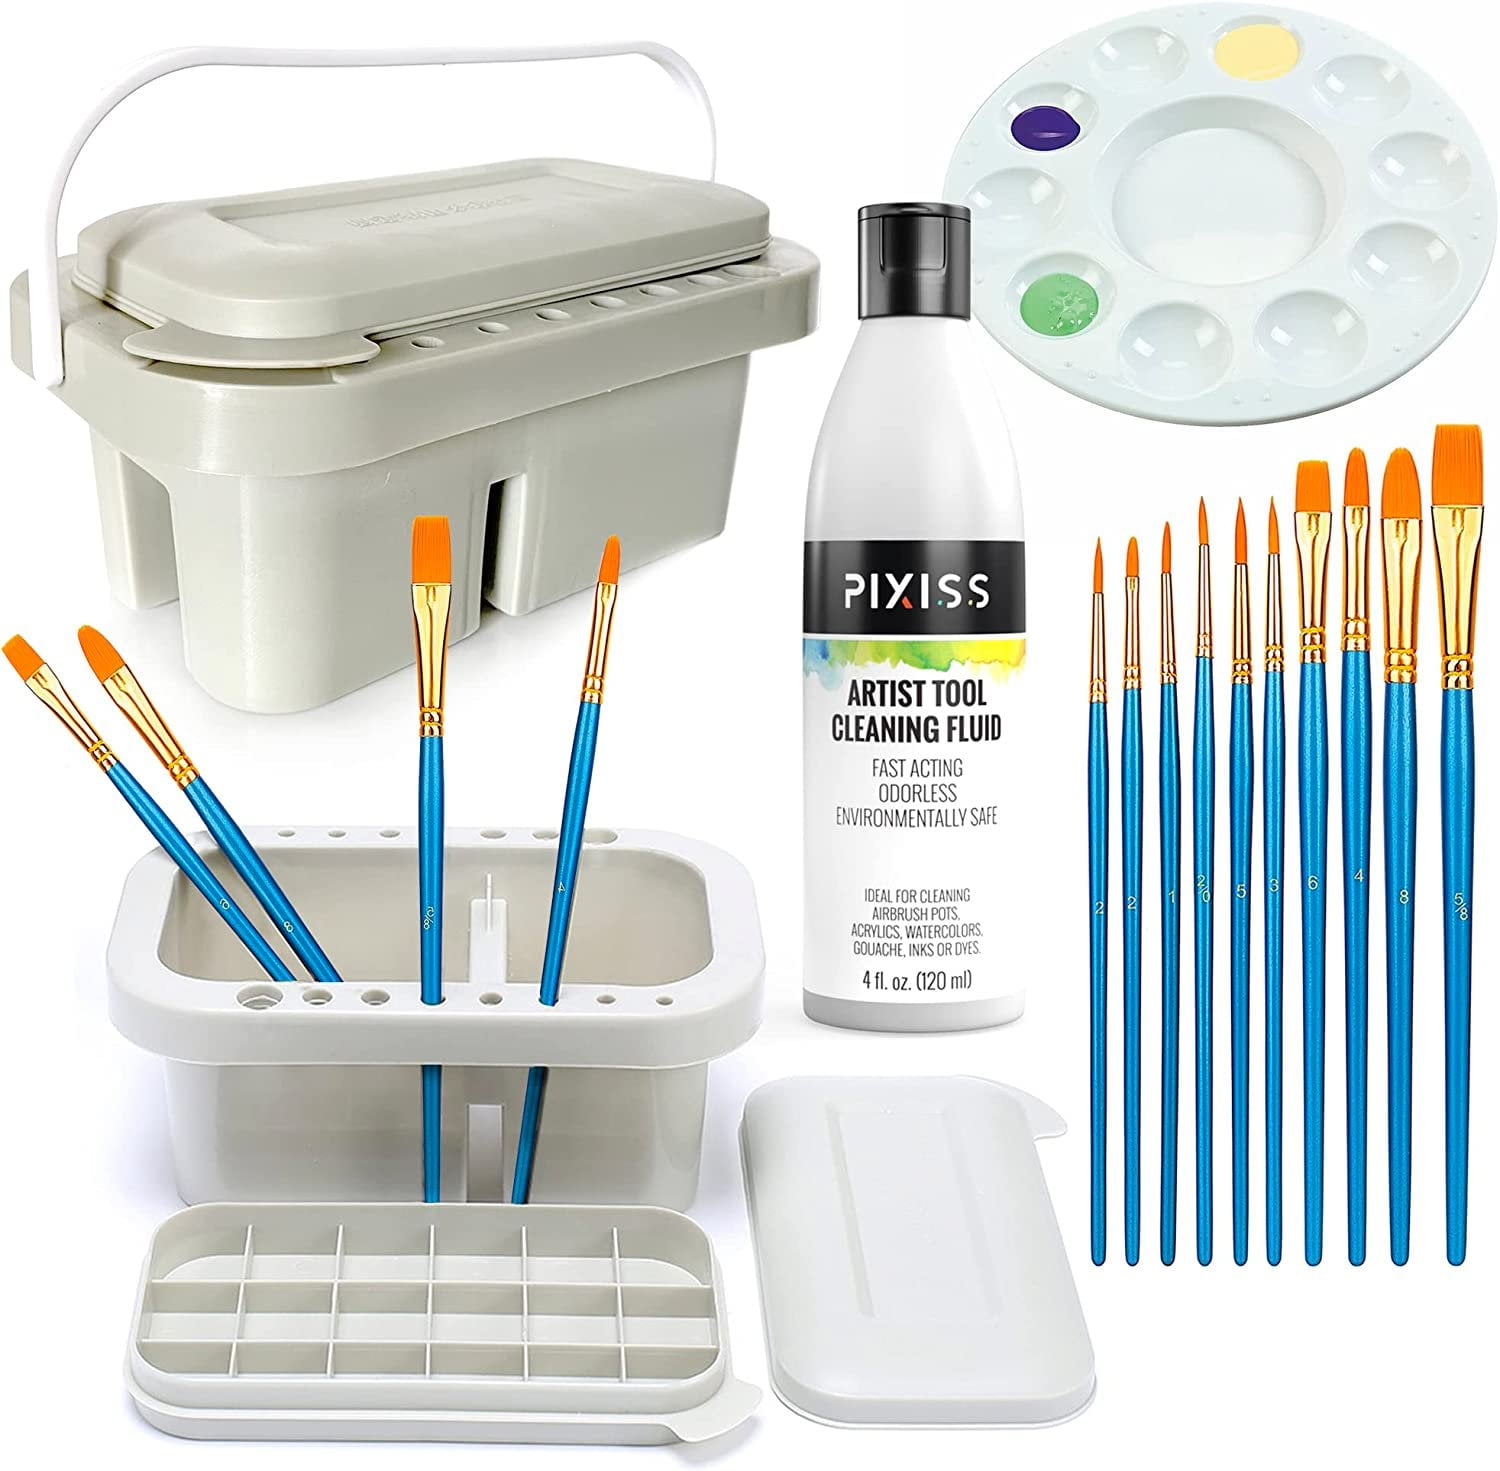 Create Your Own Paint Brush Cleaning Container  Cleaning paint brushes,  Cleaning oil paint brushes, Cleaning oil paintings